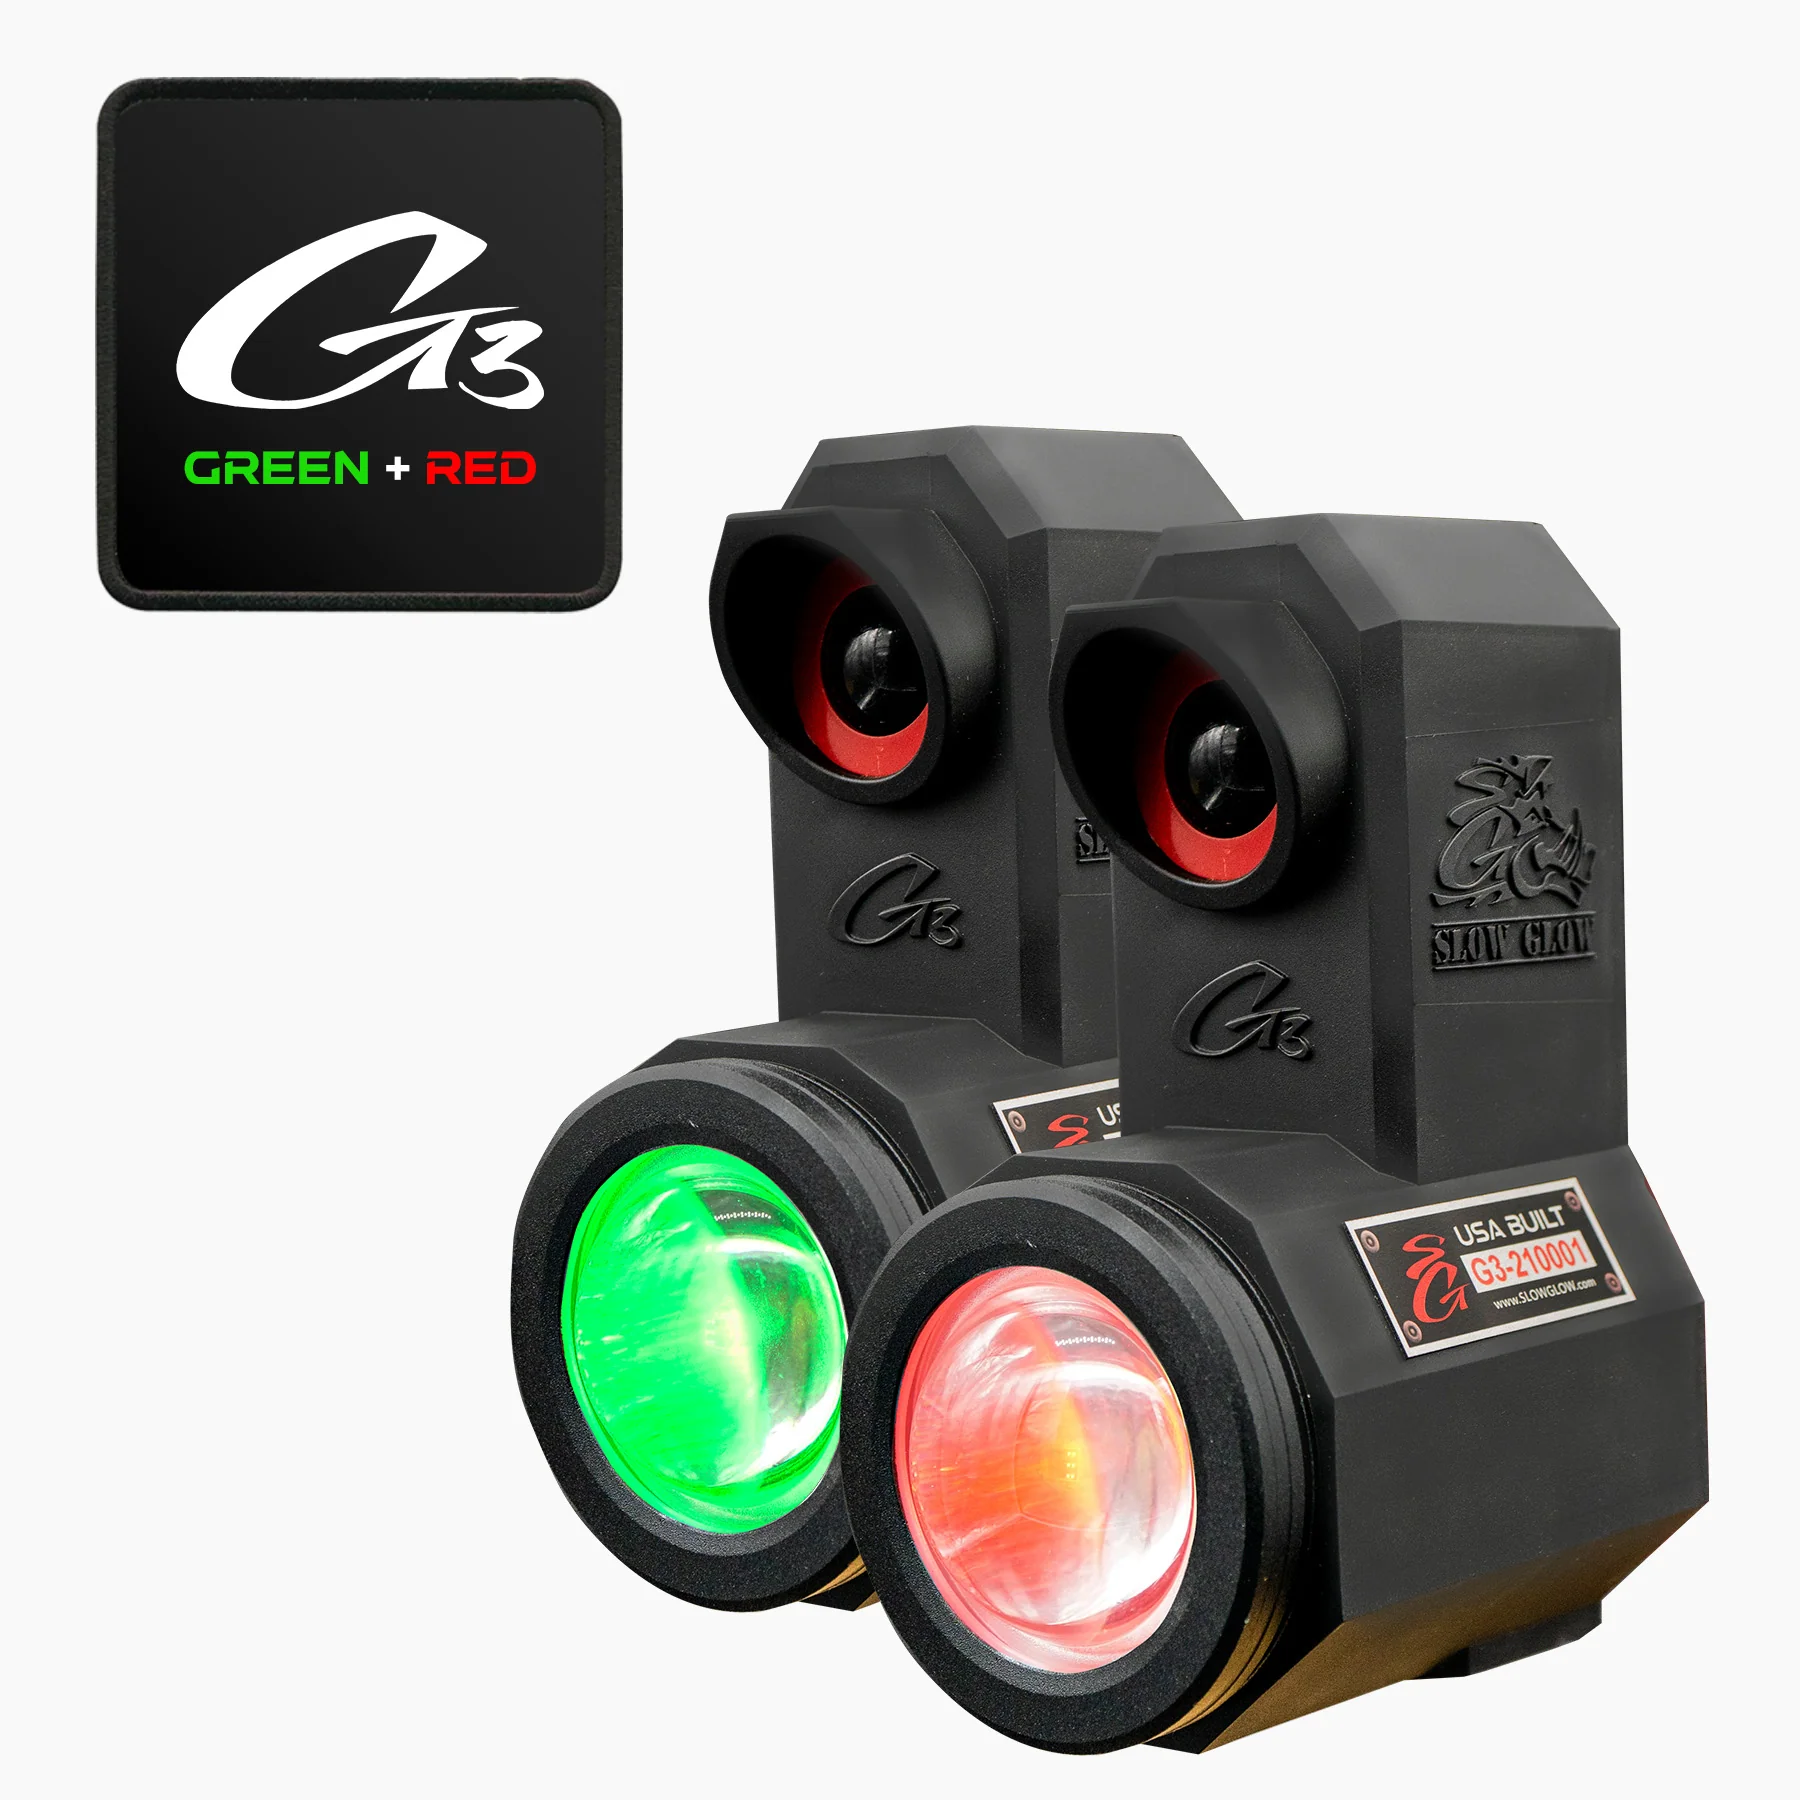 How bright (in lumens) is the G3 at full power?